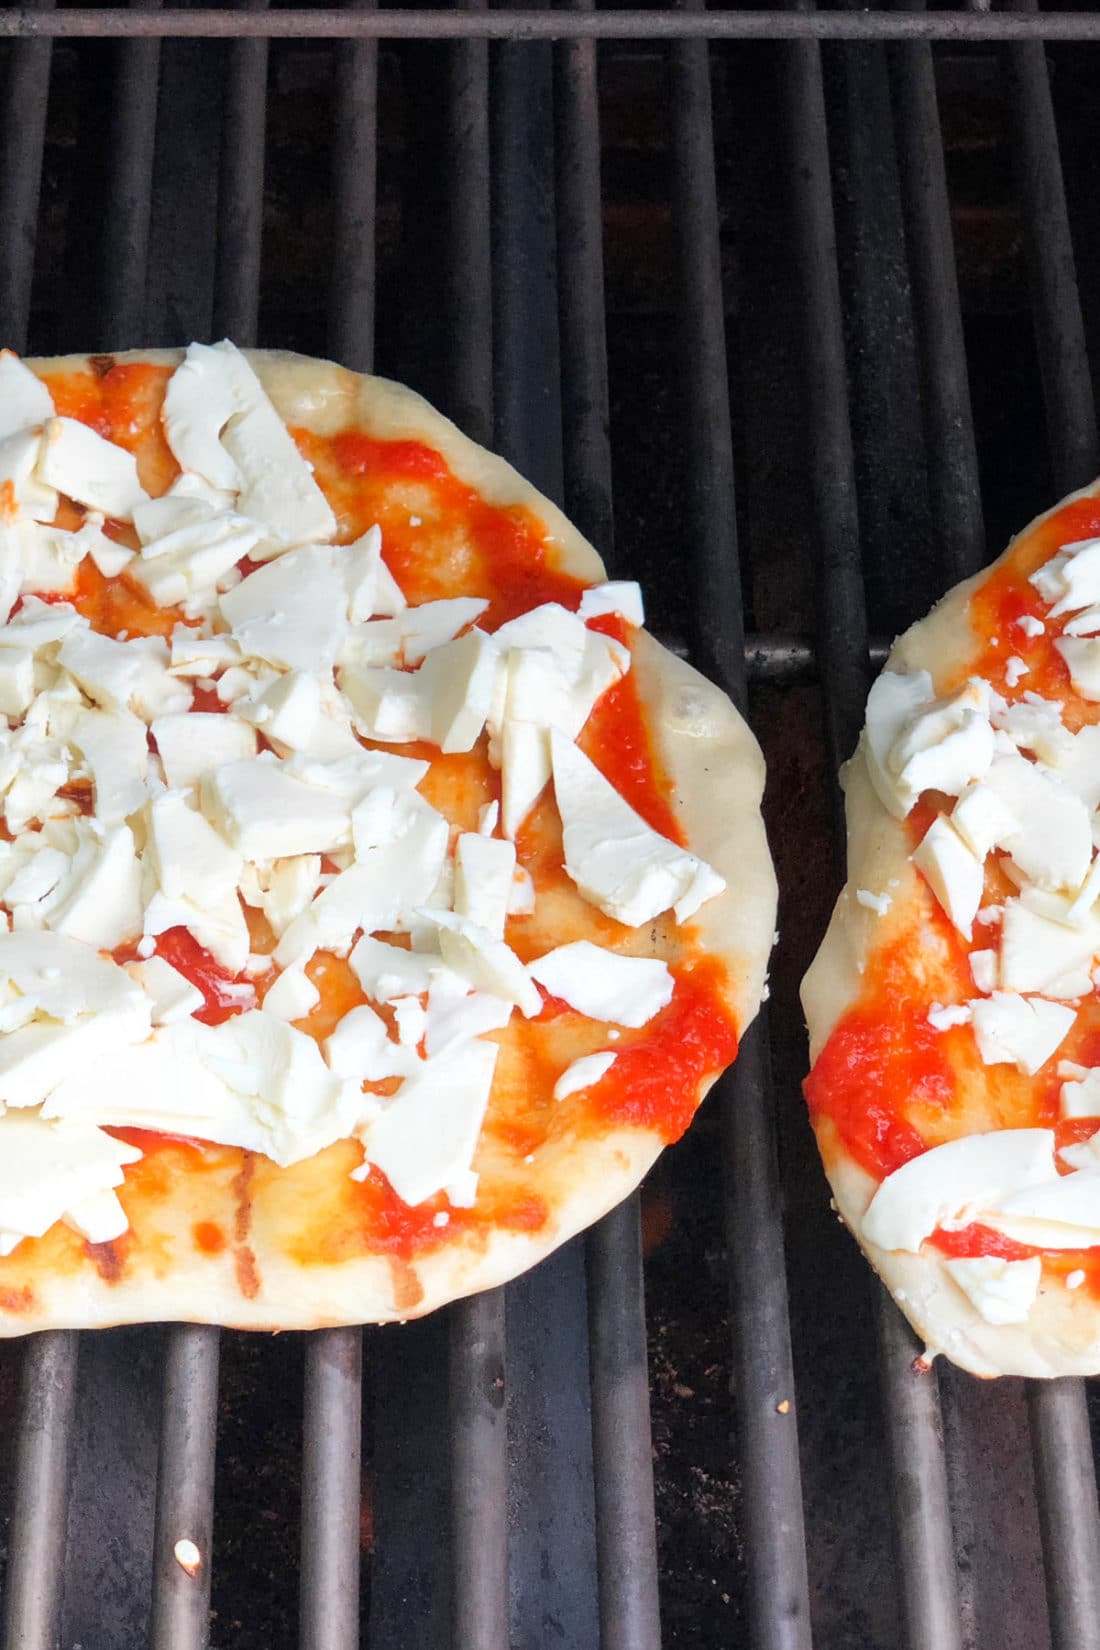 Two pizzas with sauce and cheese on the grill.